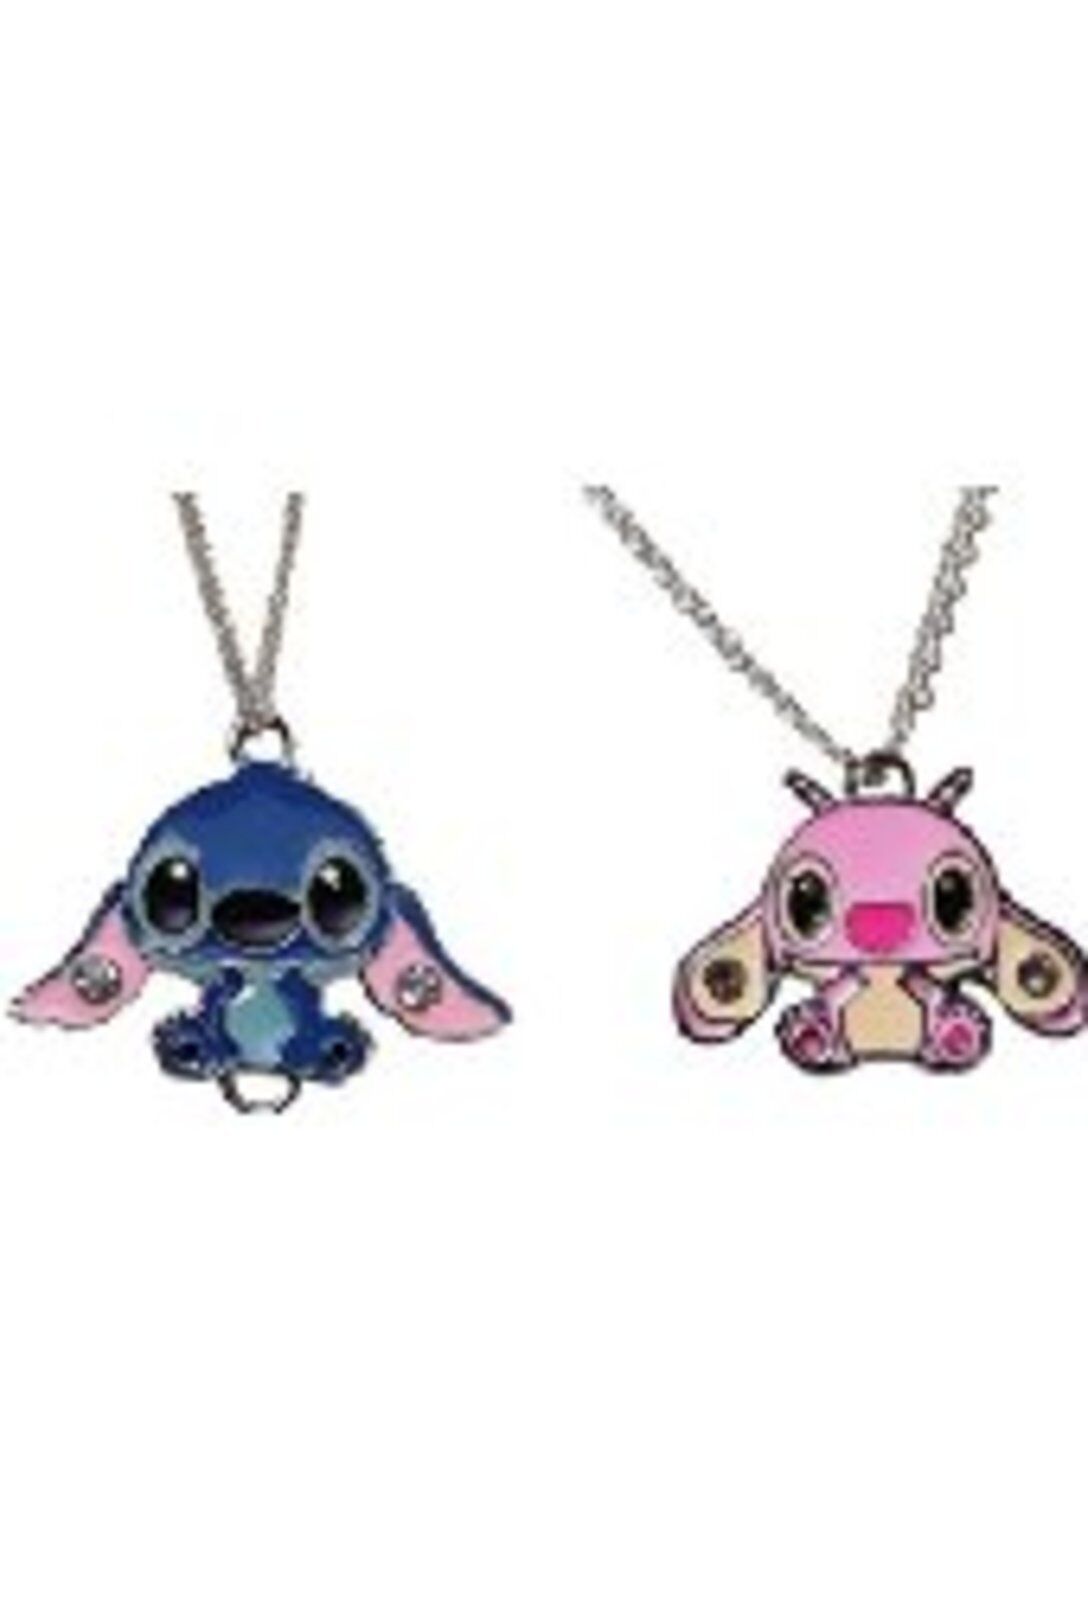 Bff Necklace Disney Lilo and Stitch Best Friend Necklace for 2 Friends  Heart Pendant Accessories Kids Jewellery for Girls